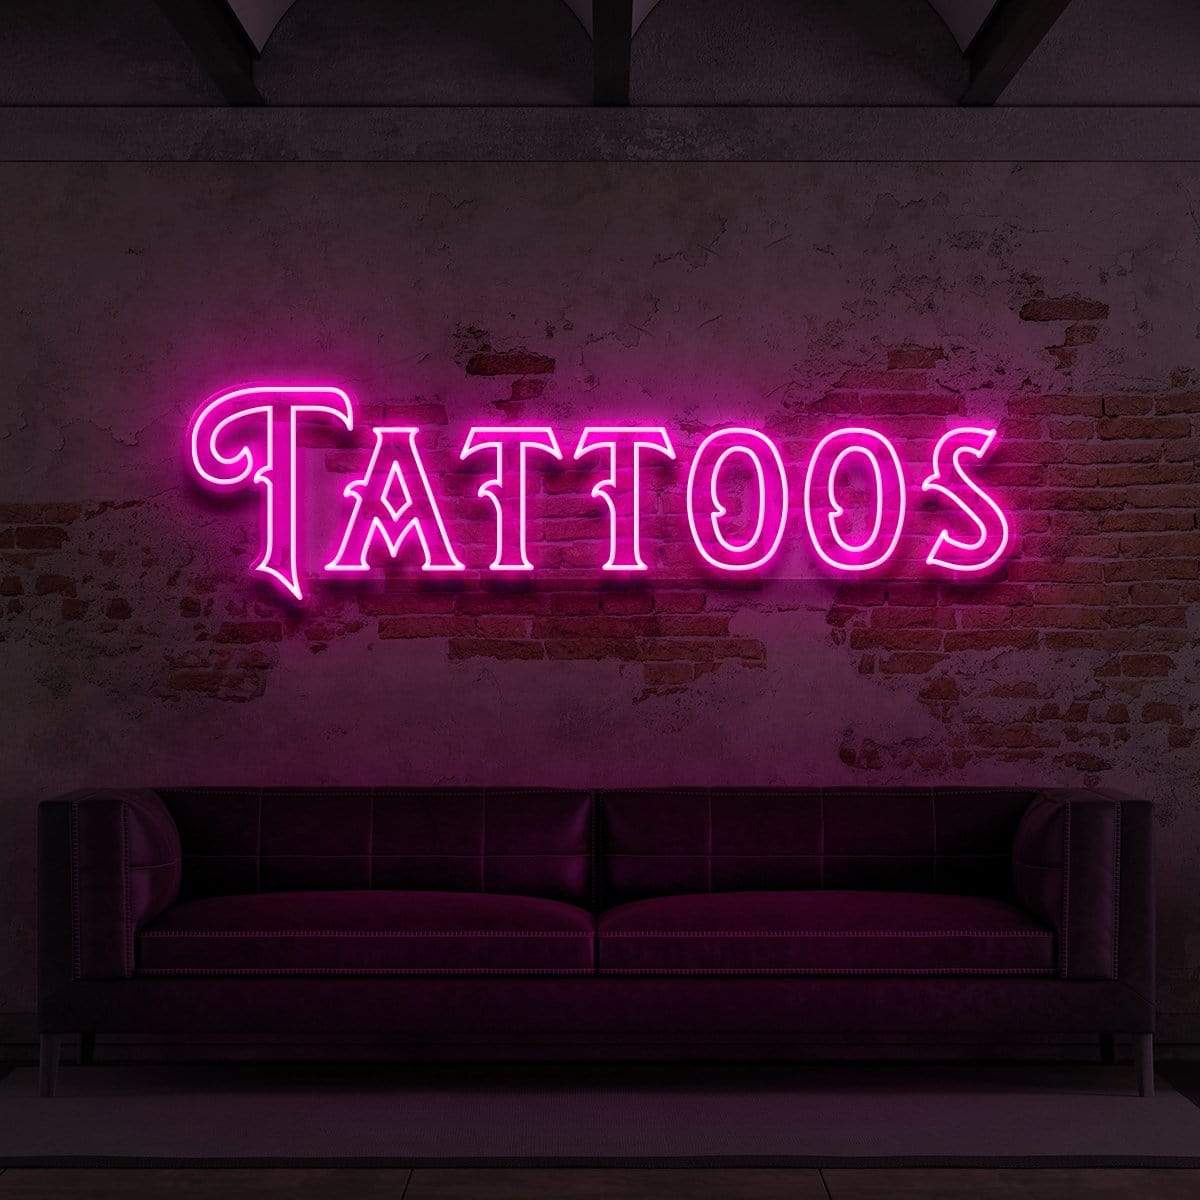 "Tattoos" Neon Sign for Tattoo Parlours